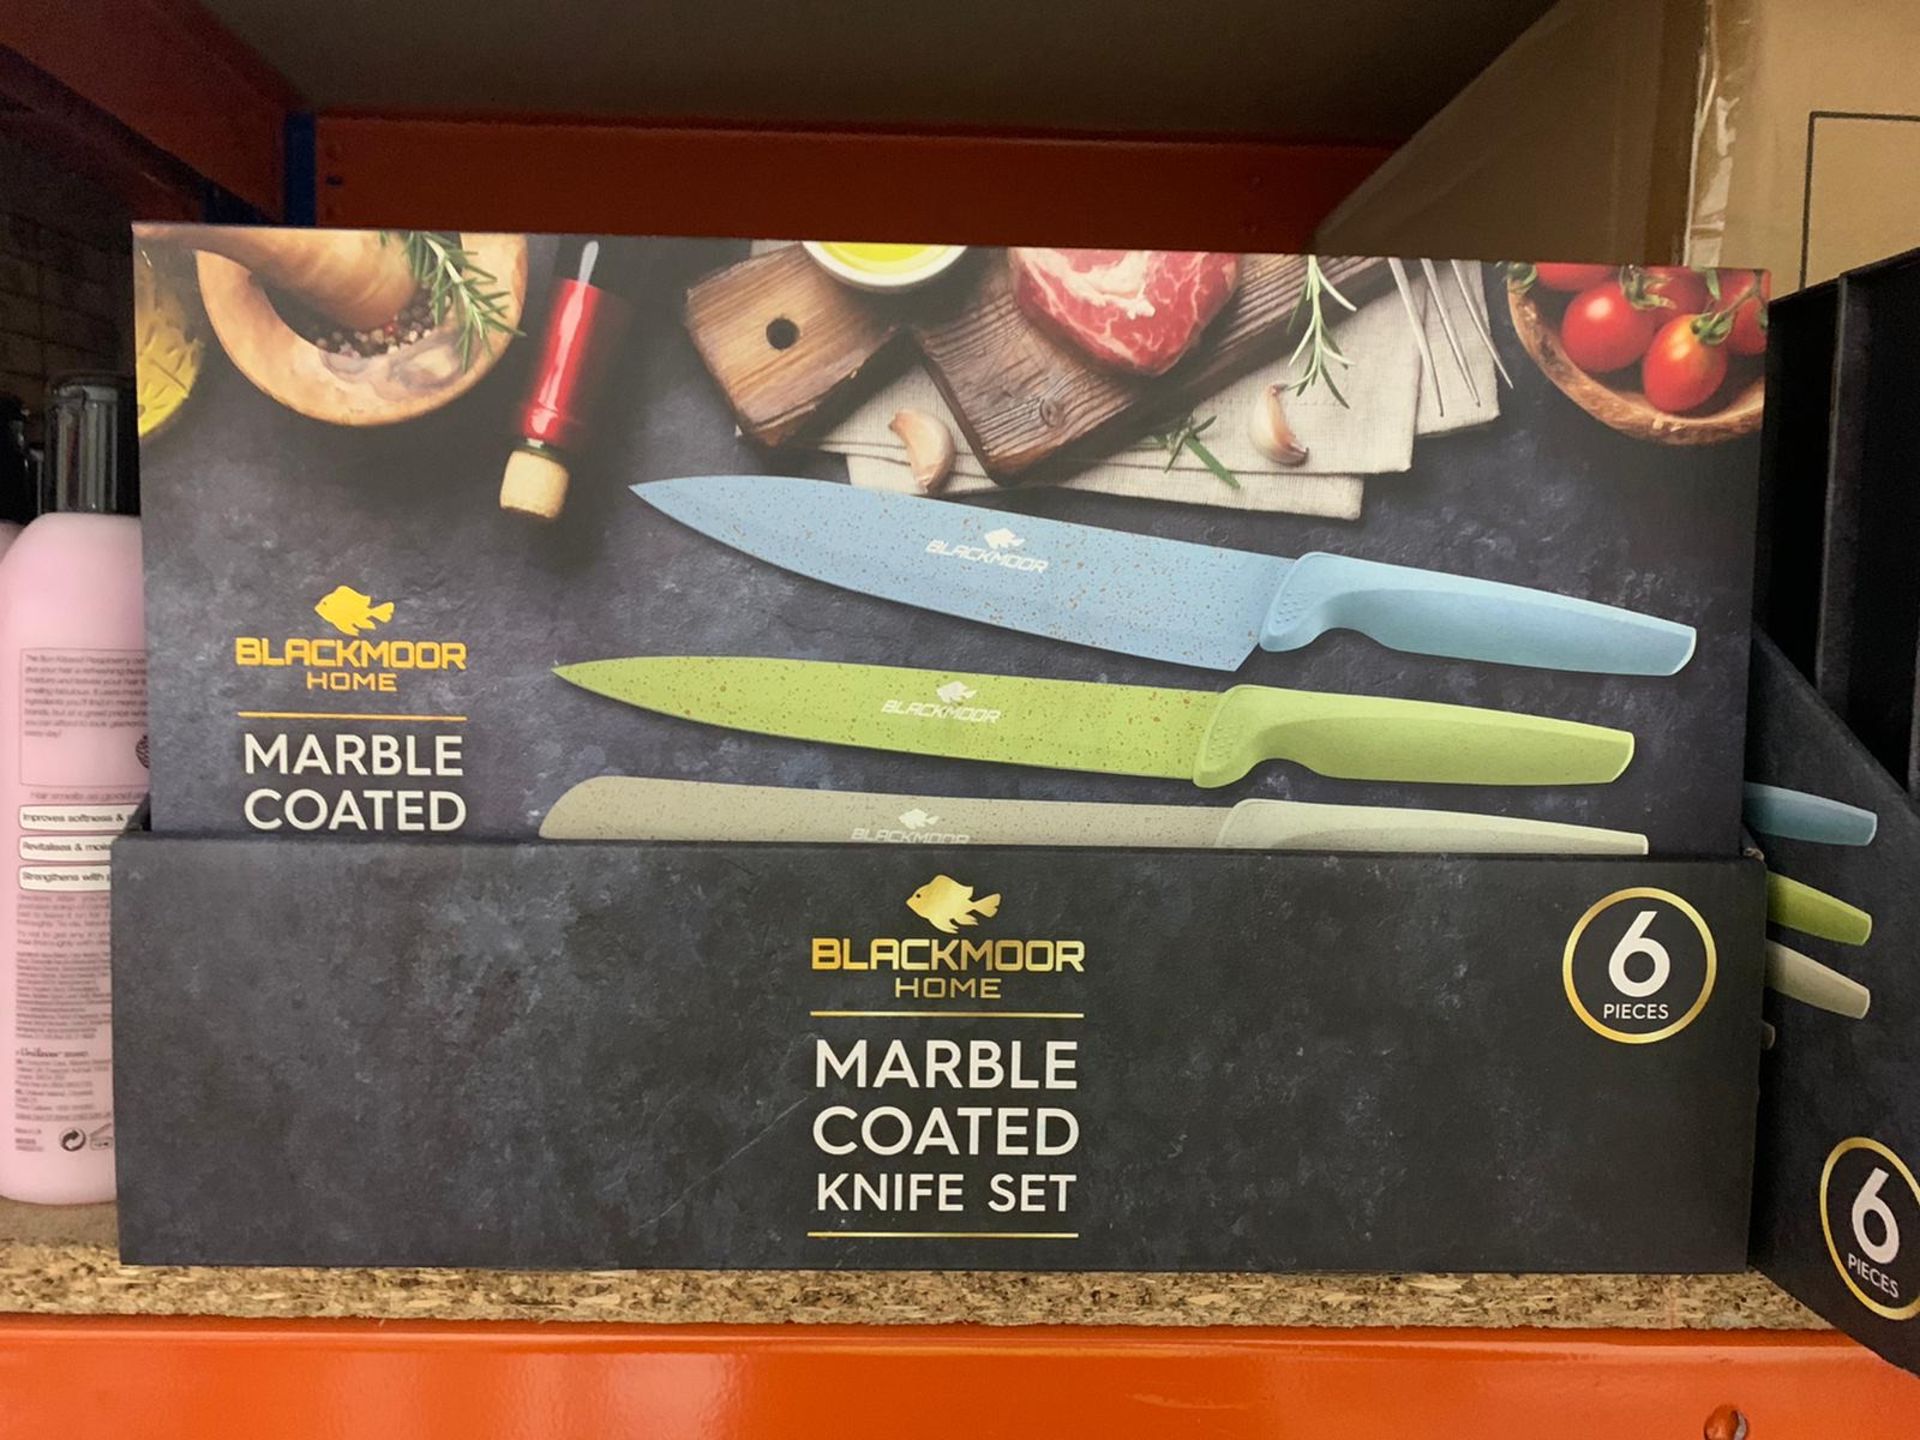 4 x NEW BLACKMOOR HOME MARBLE COATED KNIFE SETS (18+ ONLY - ID REQUIRED)